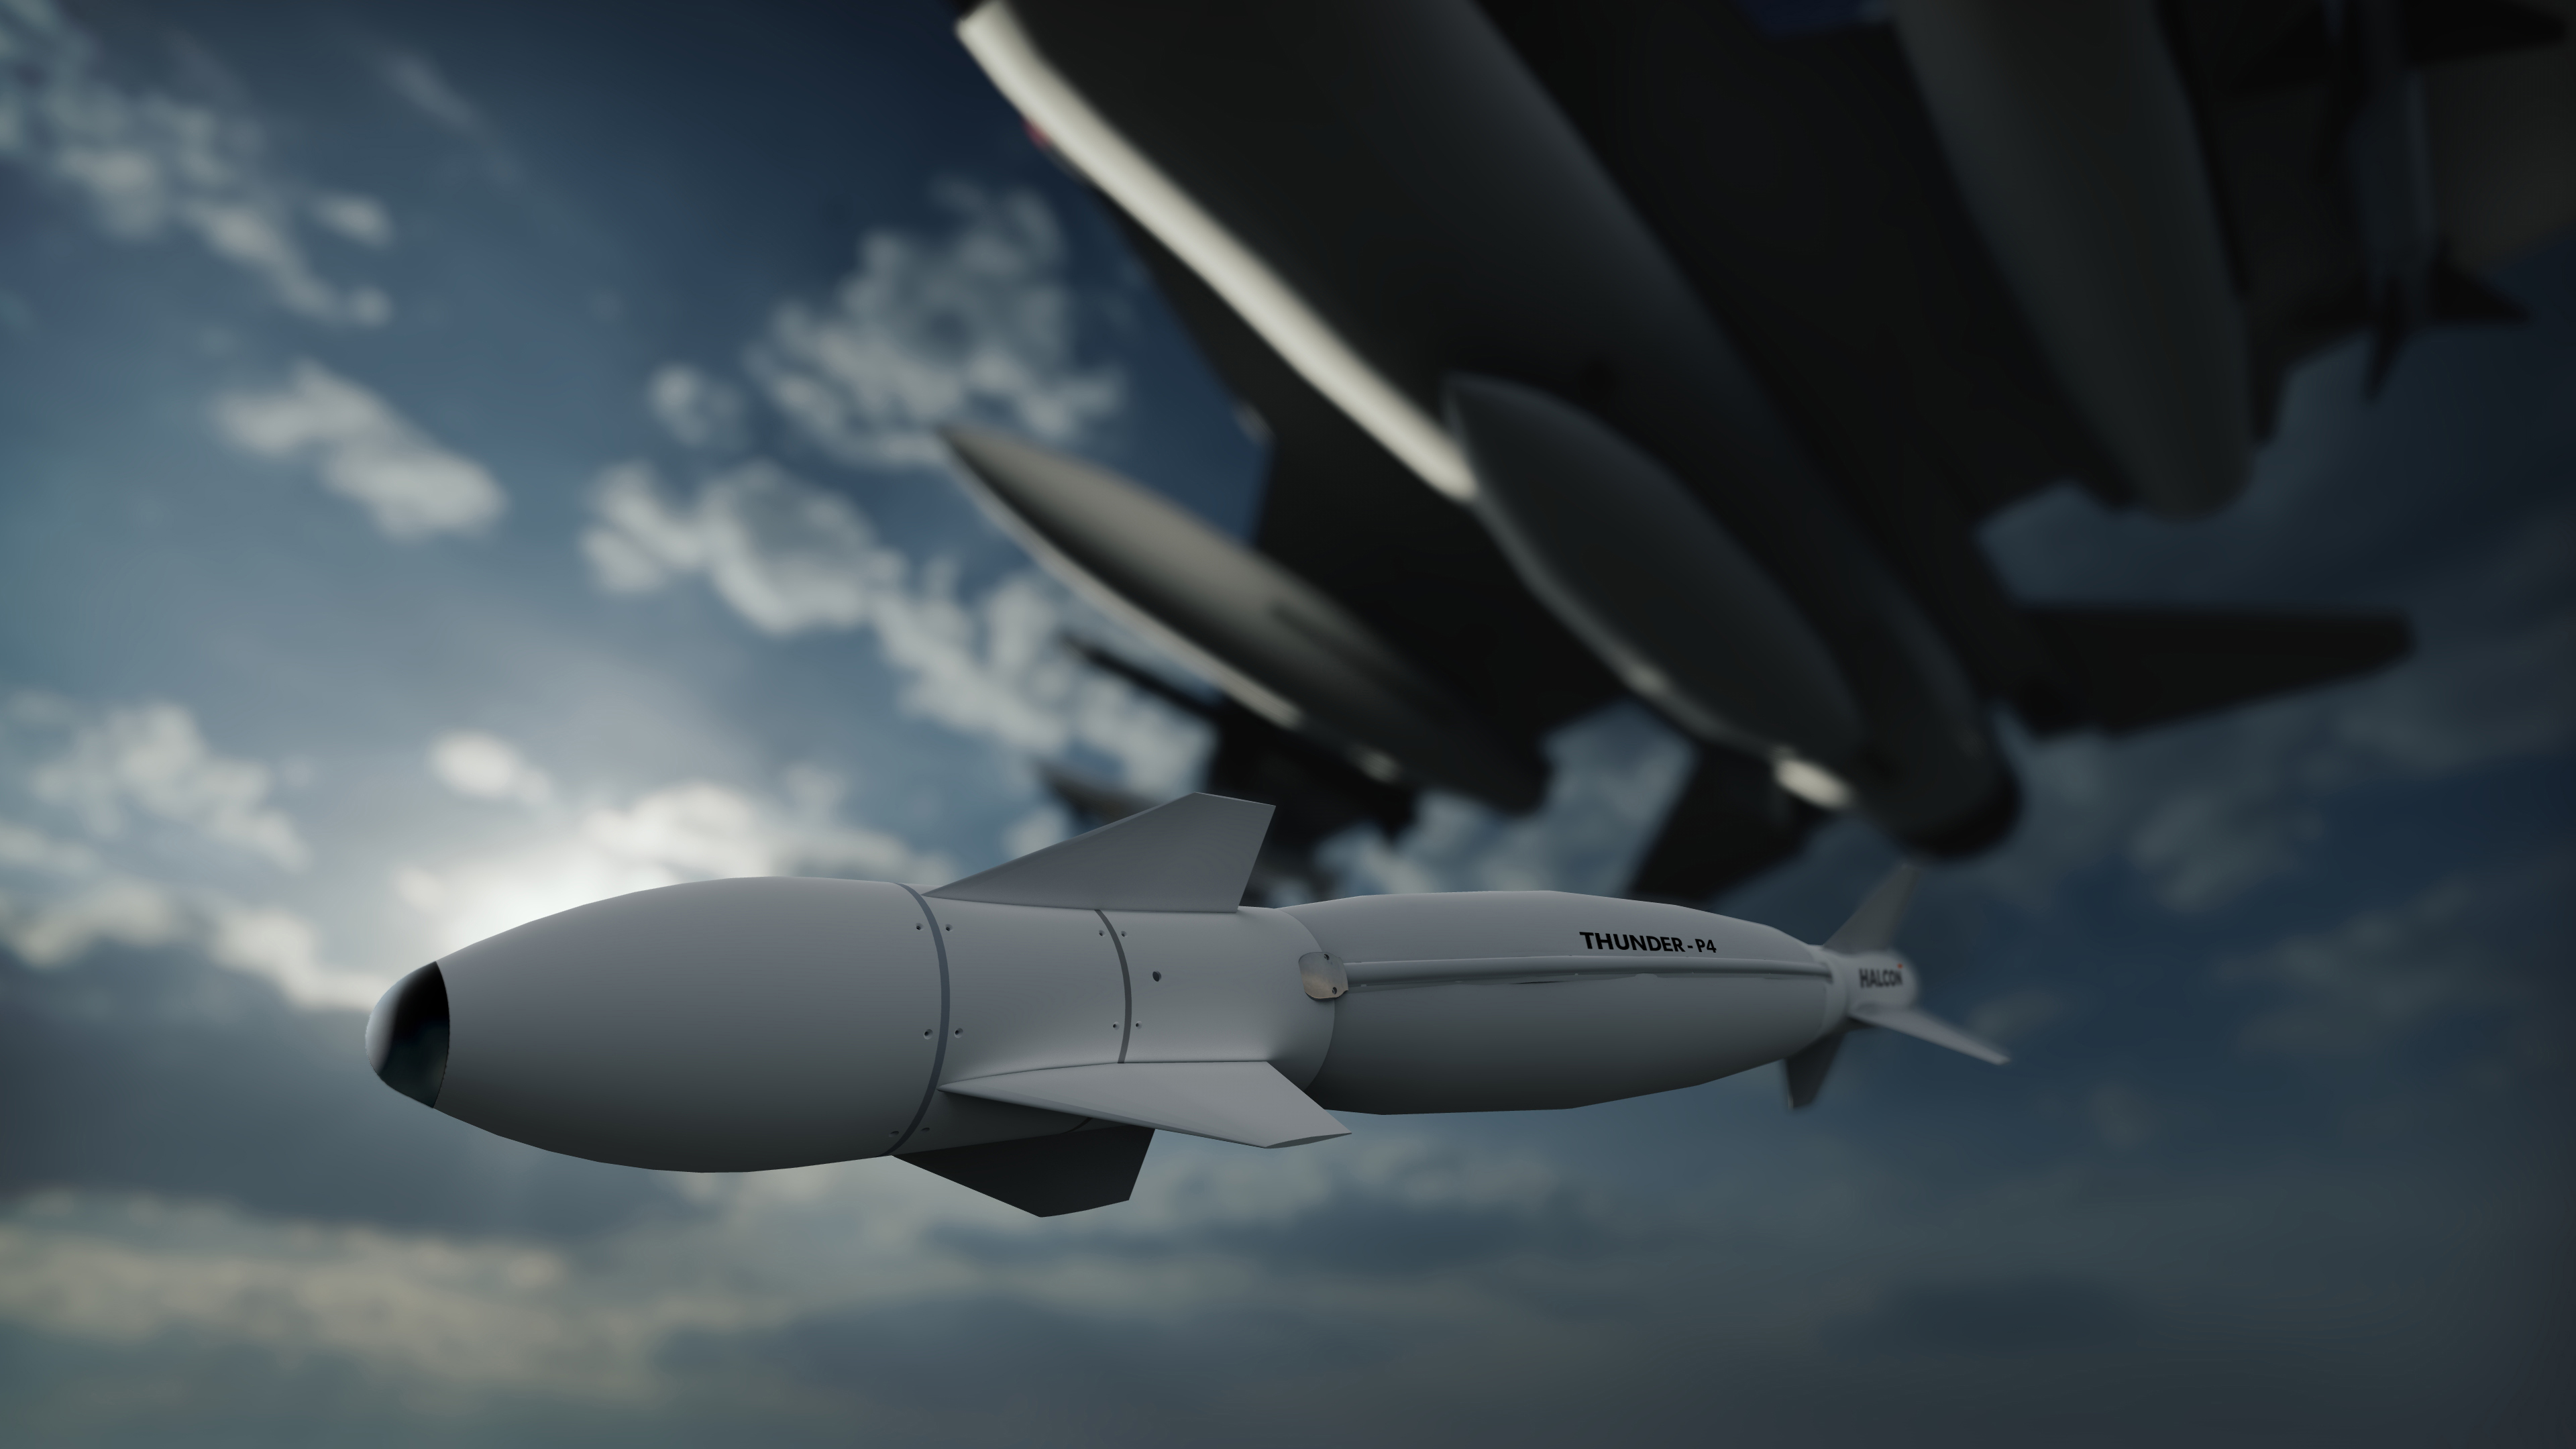 Thunder precision guided munitions system